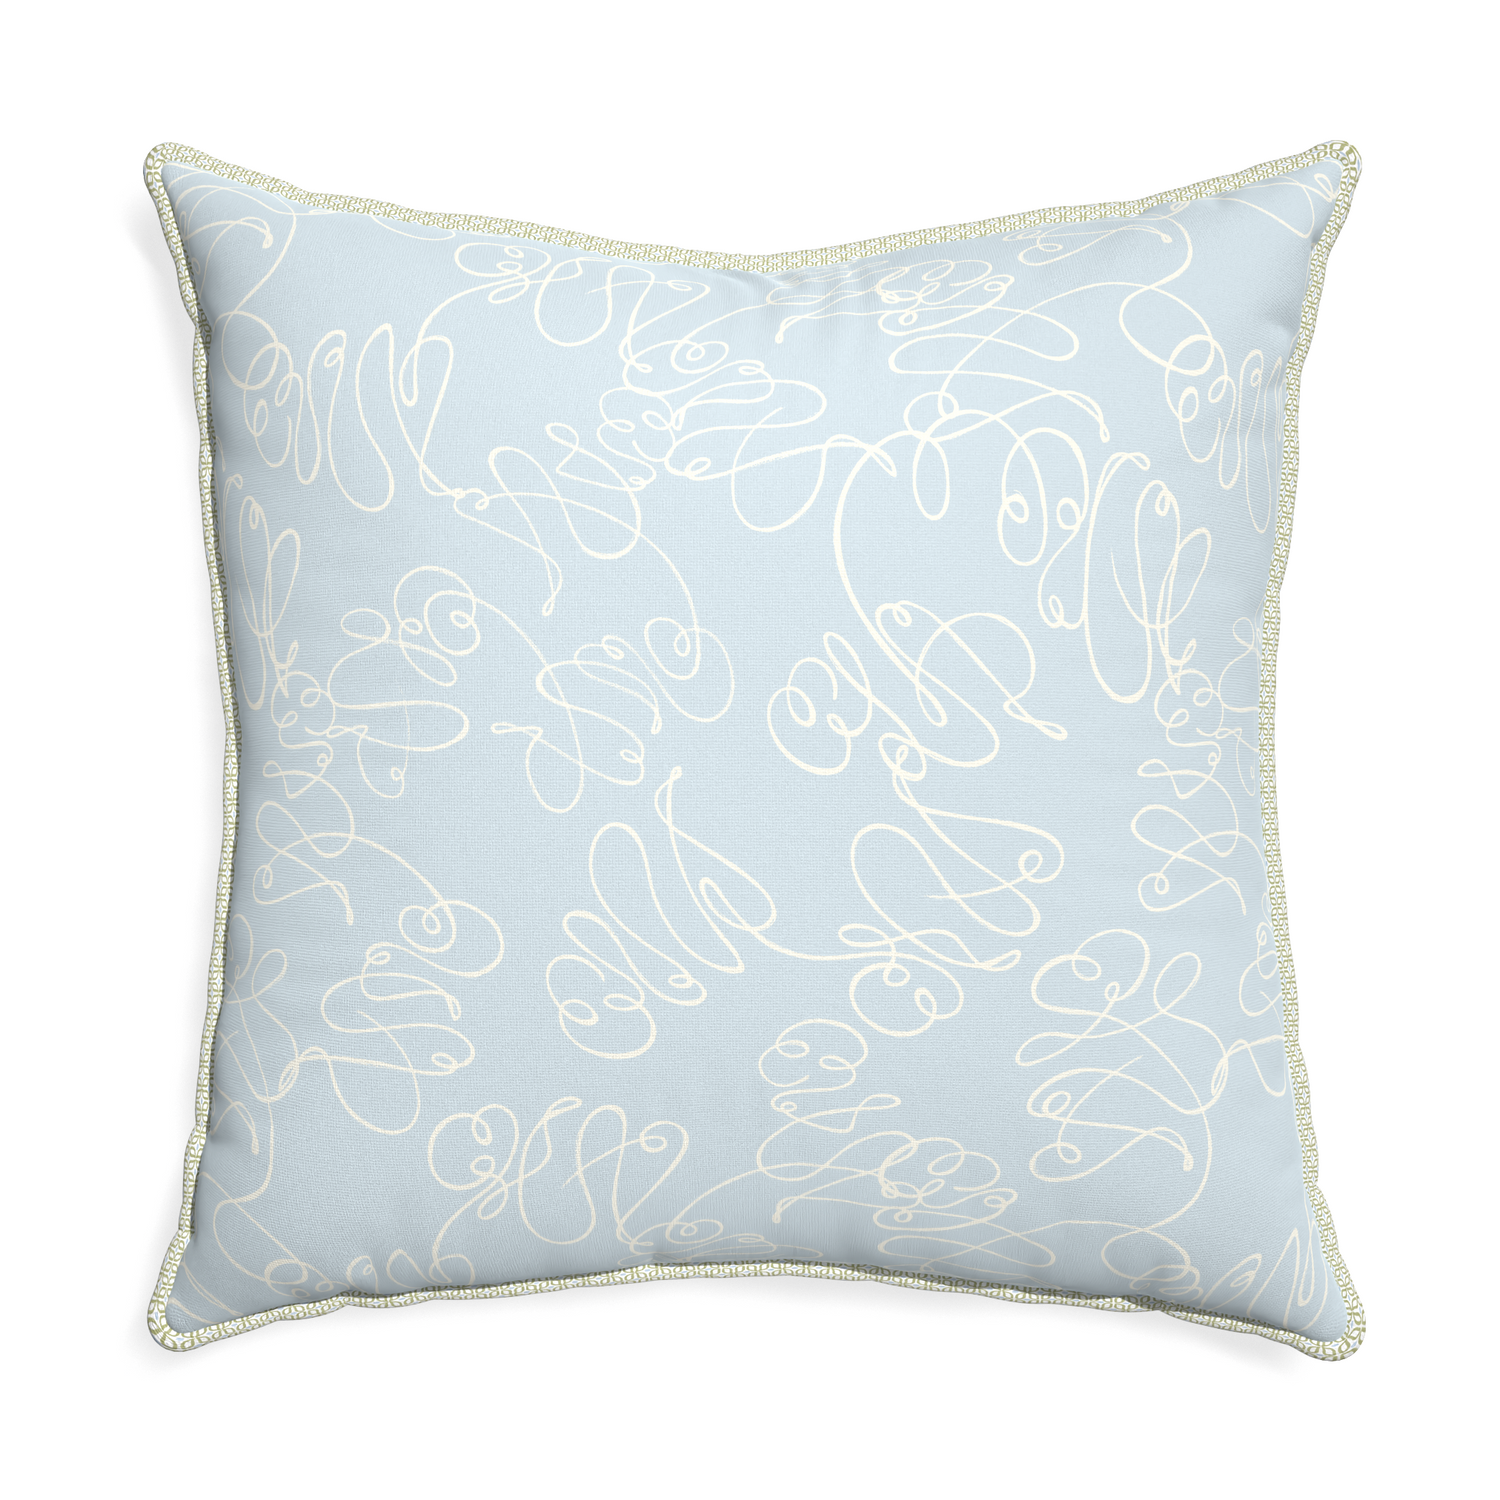 Euro-sham mirabella custom pillow with l piping on white background